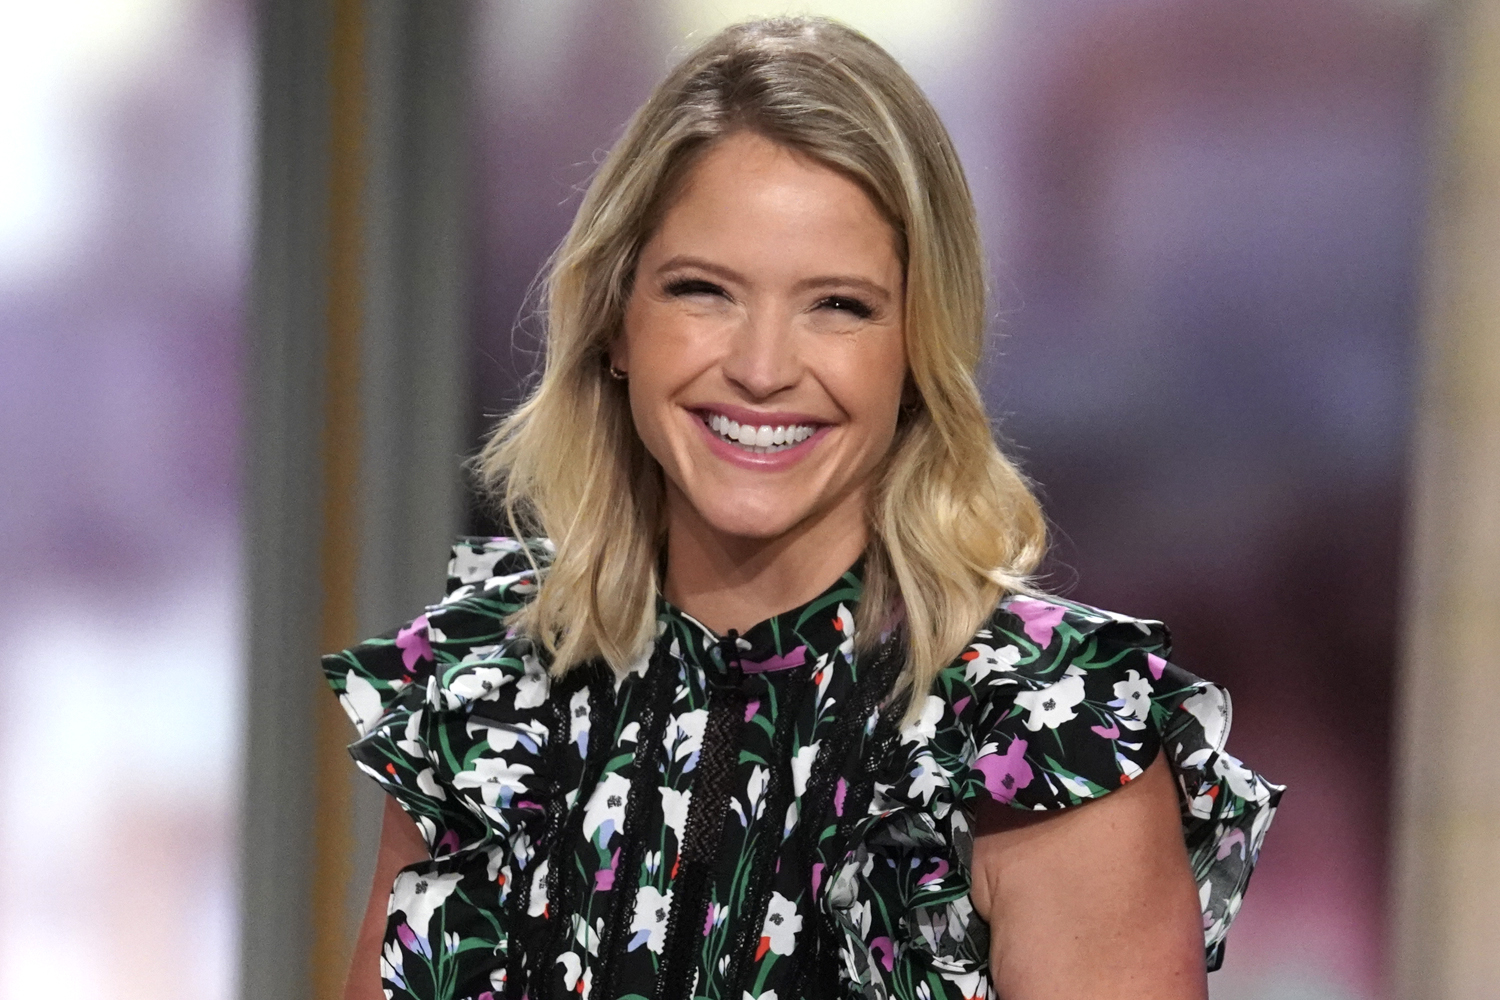 Sara Haines smiles on the set of 'The View'